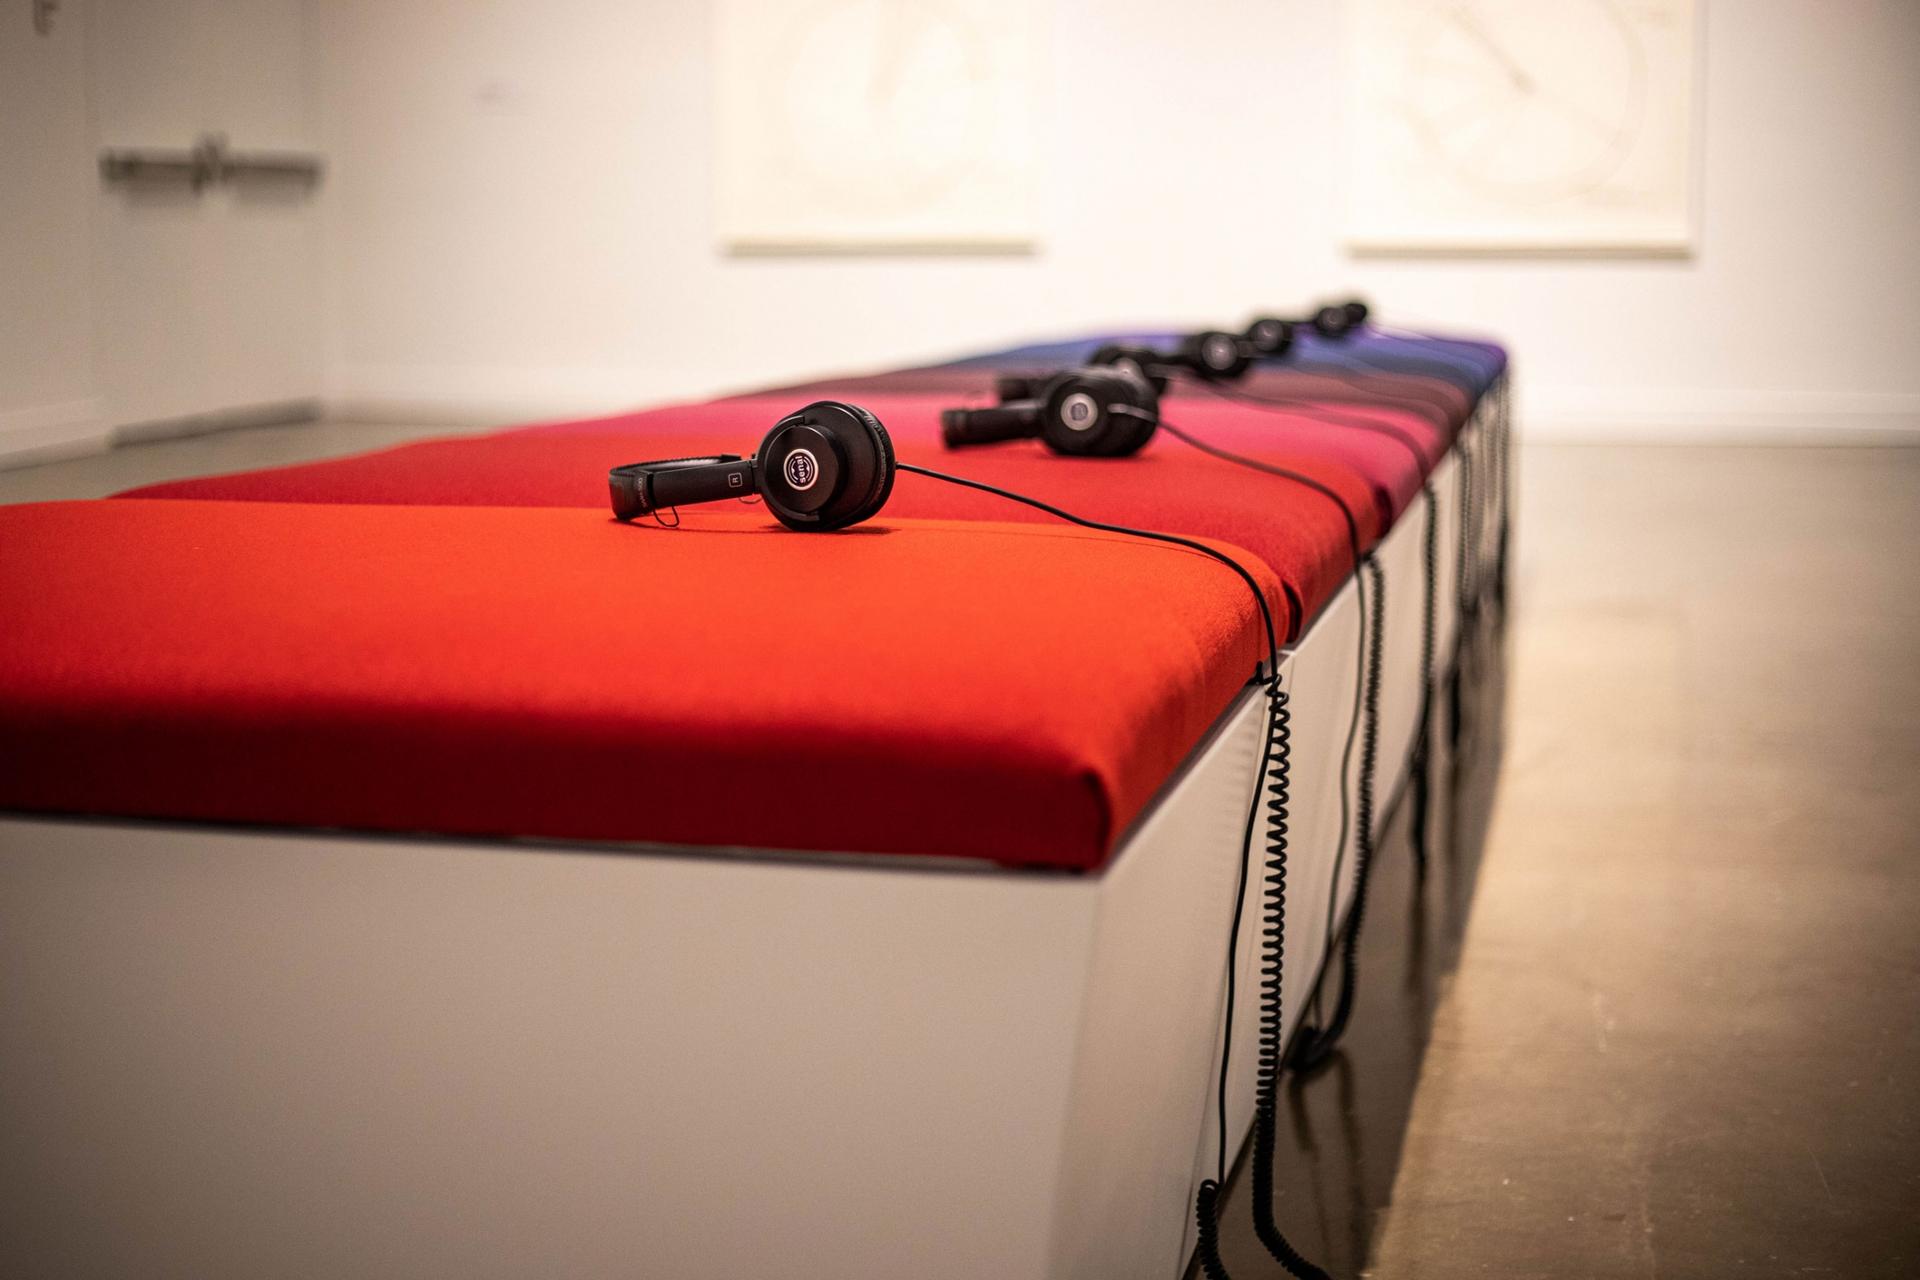 A long bench is shown with brightly colored cushions and headphones on each cushion.